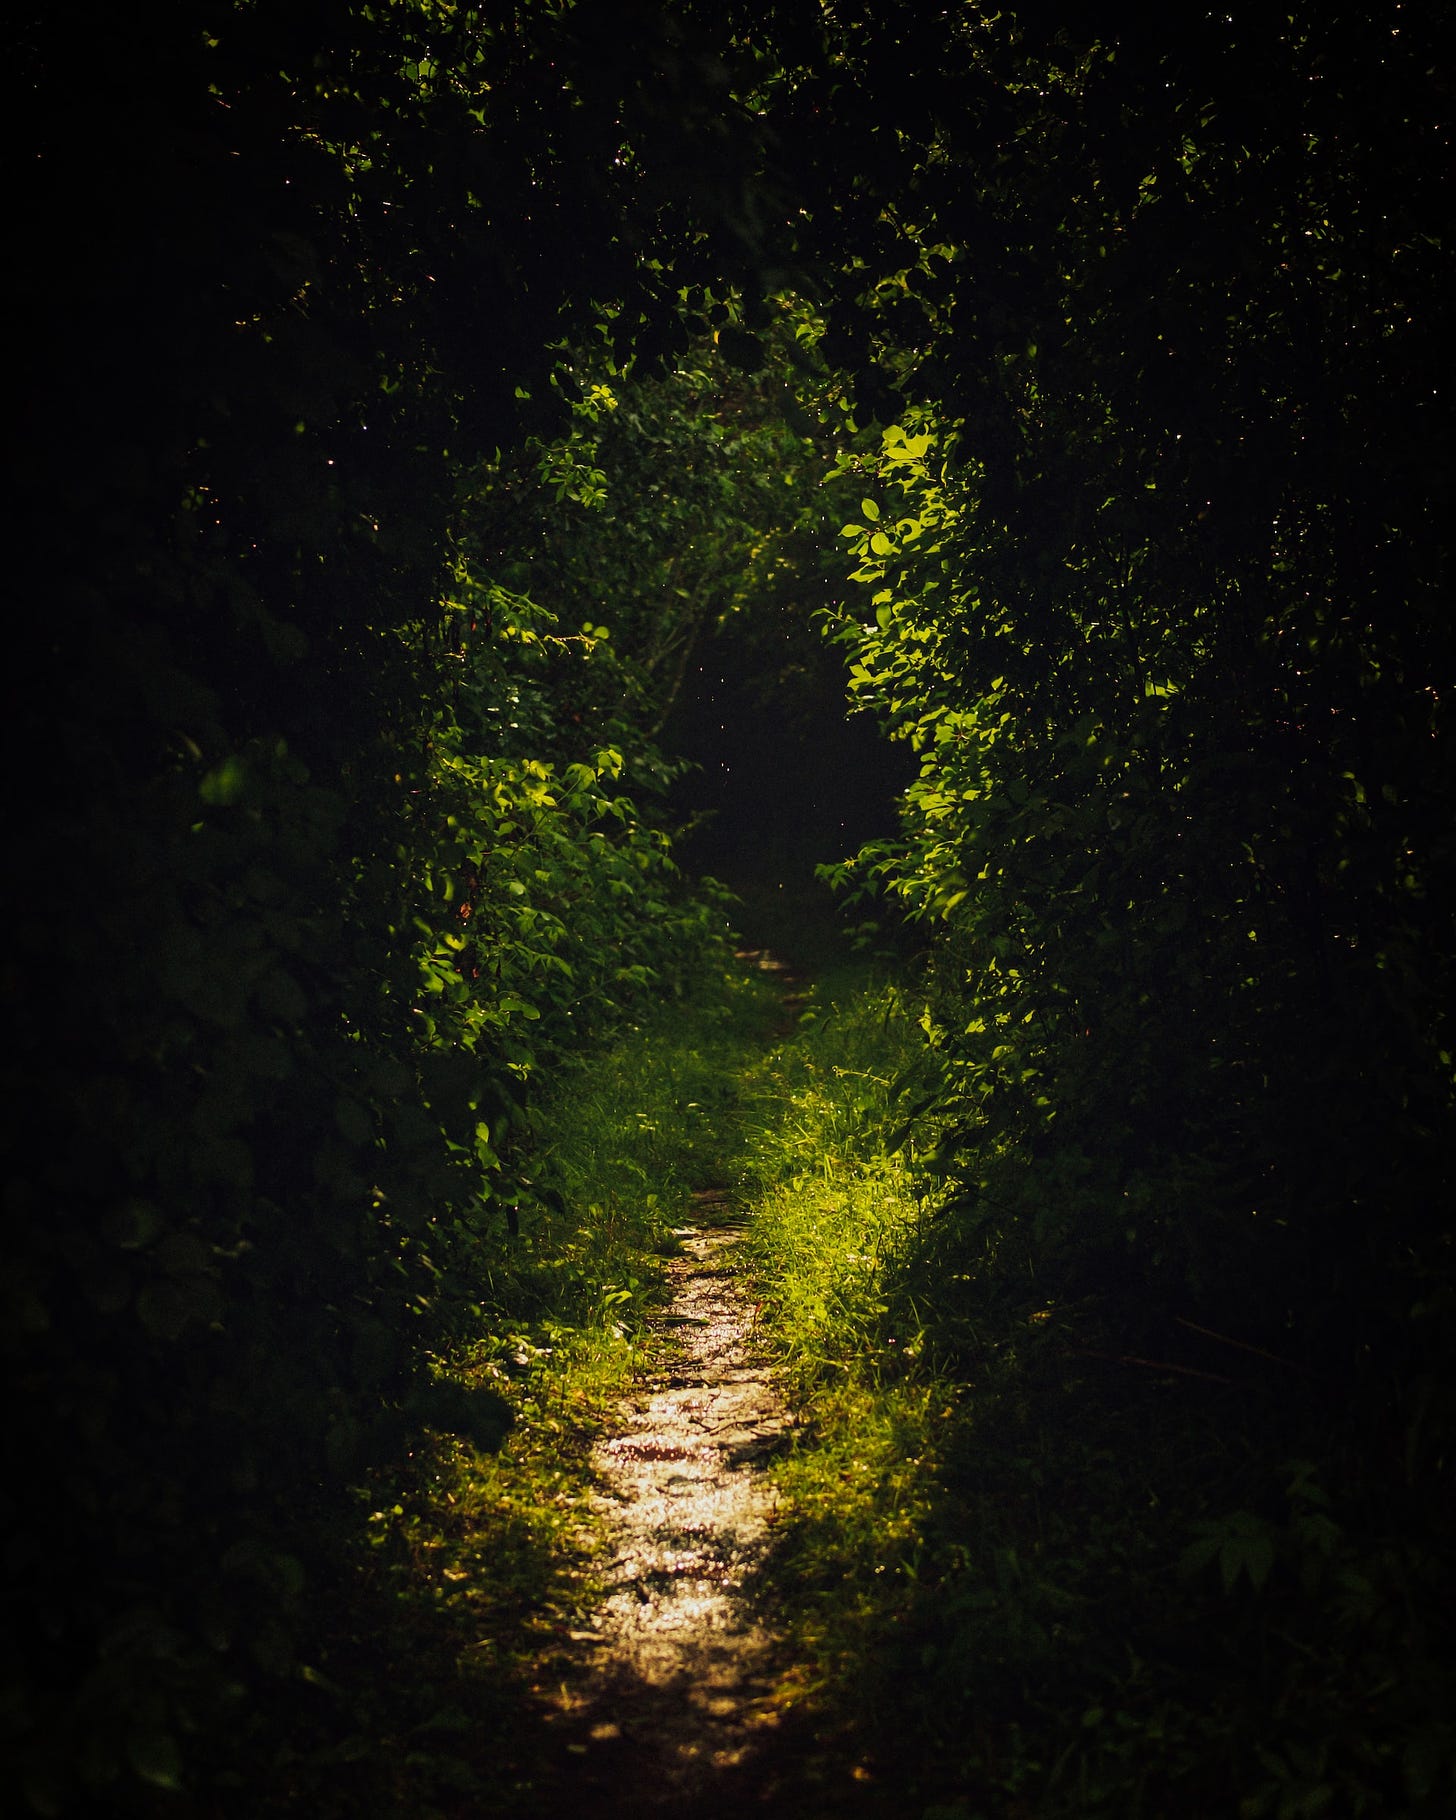 A path through overgrown brush that leads out of the dark into the daylight